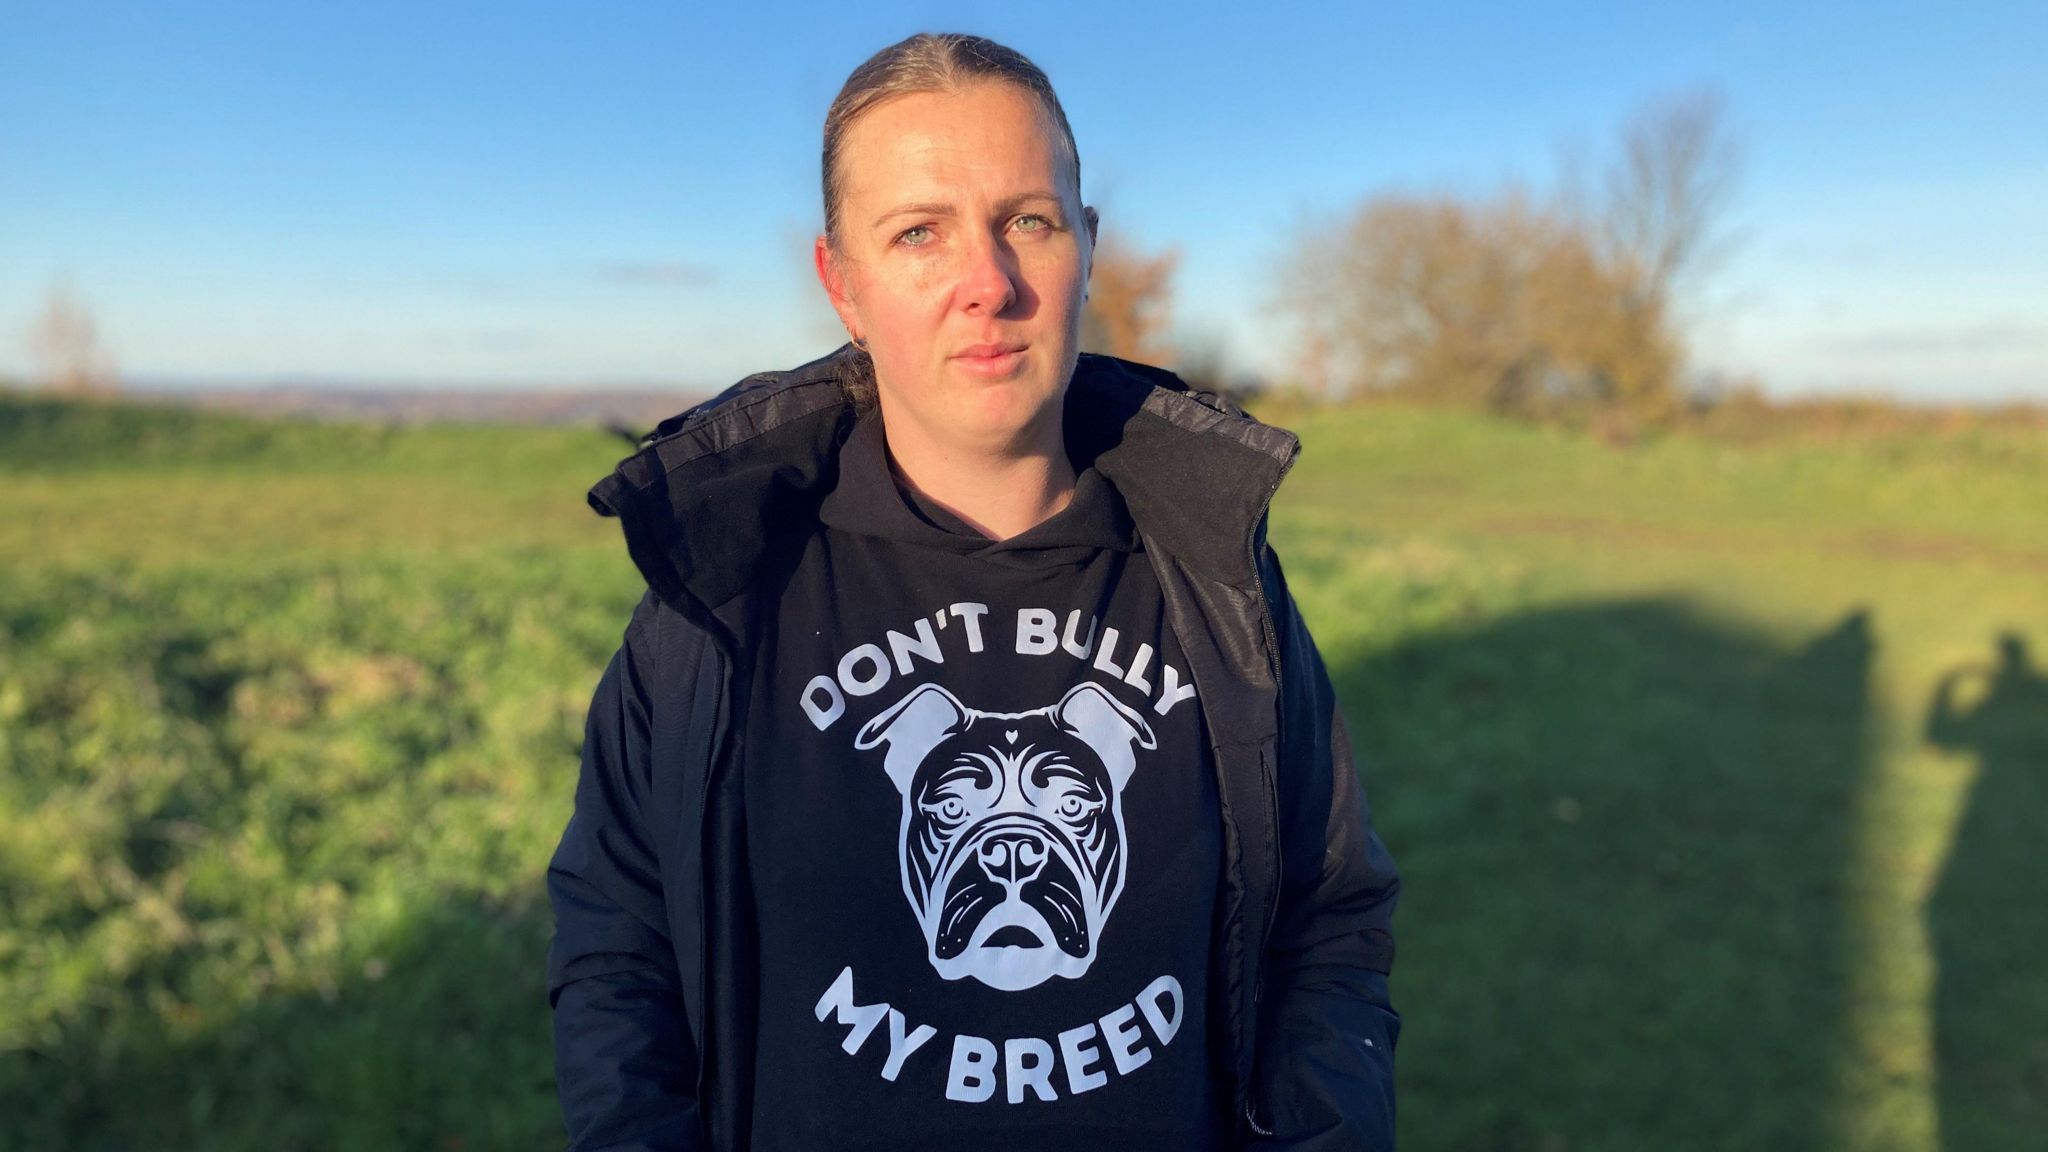 Amy Fox, an XL bully owner from Sheffield